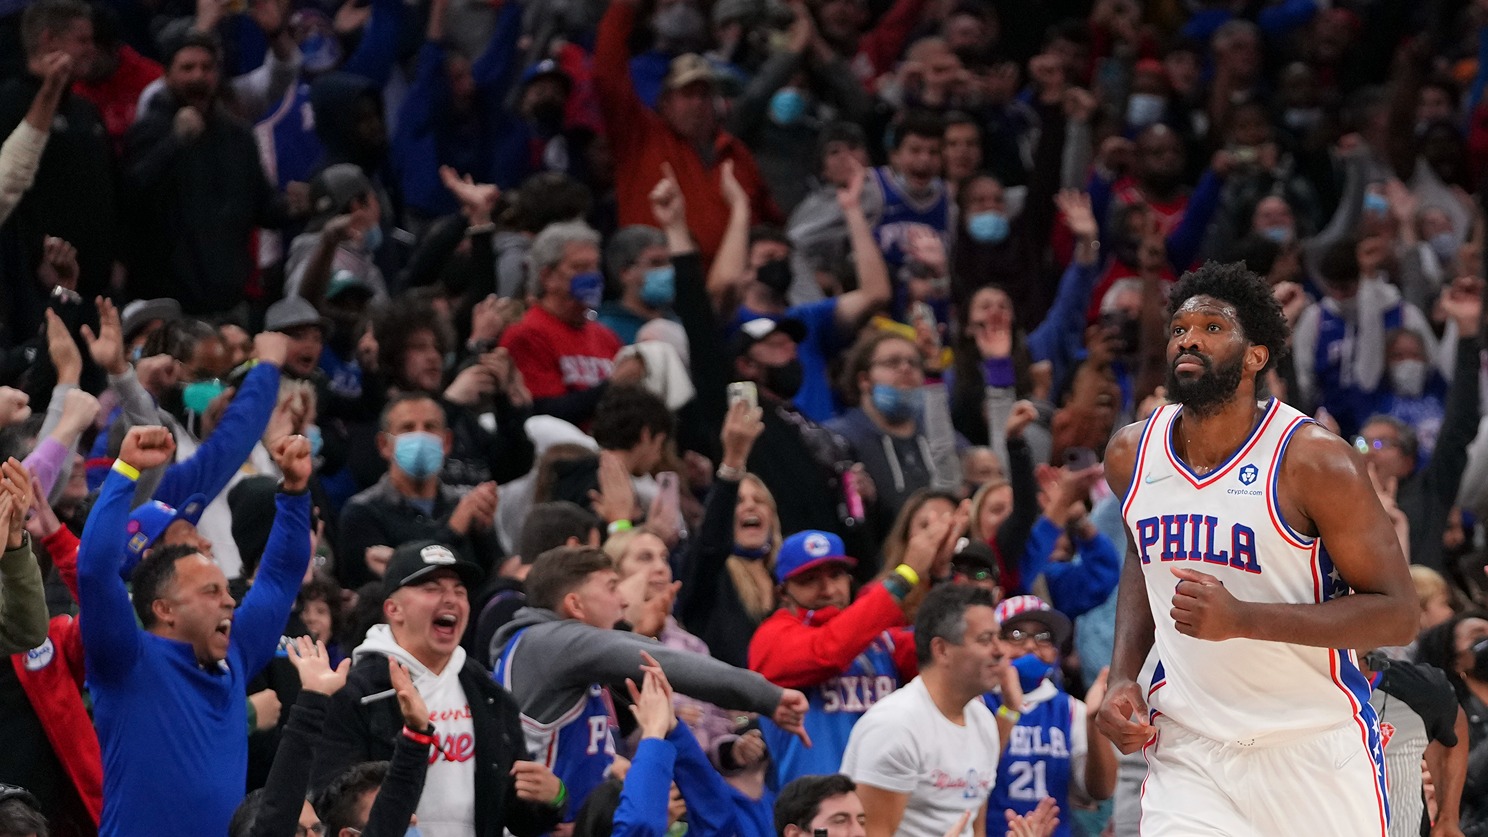 Sixers 2022-23 Single-Game Tickets Go on Sale Friday. Here's How to Buy